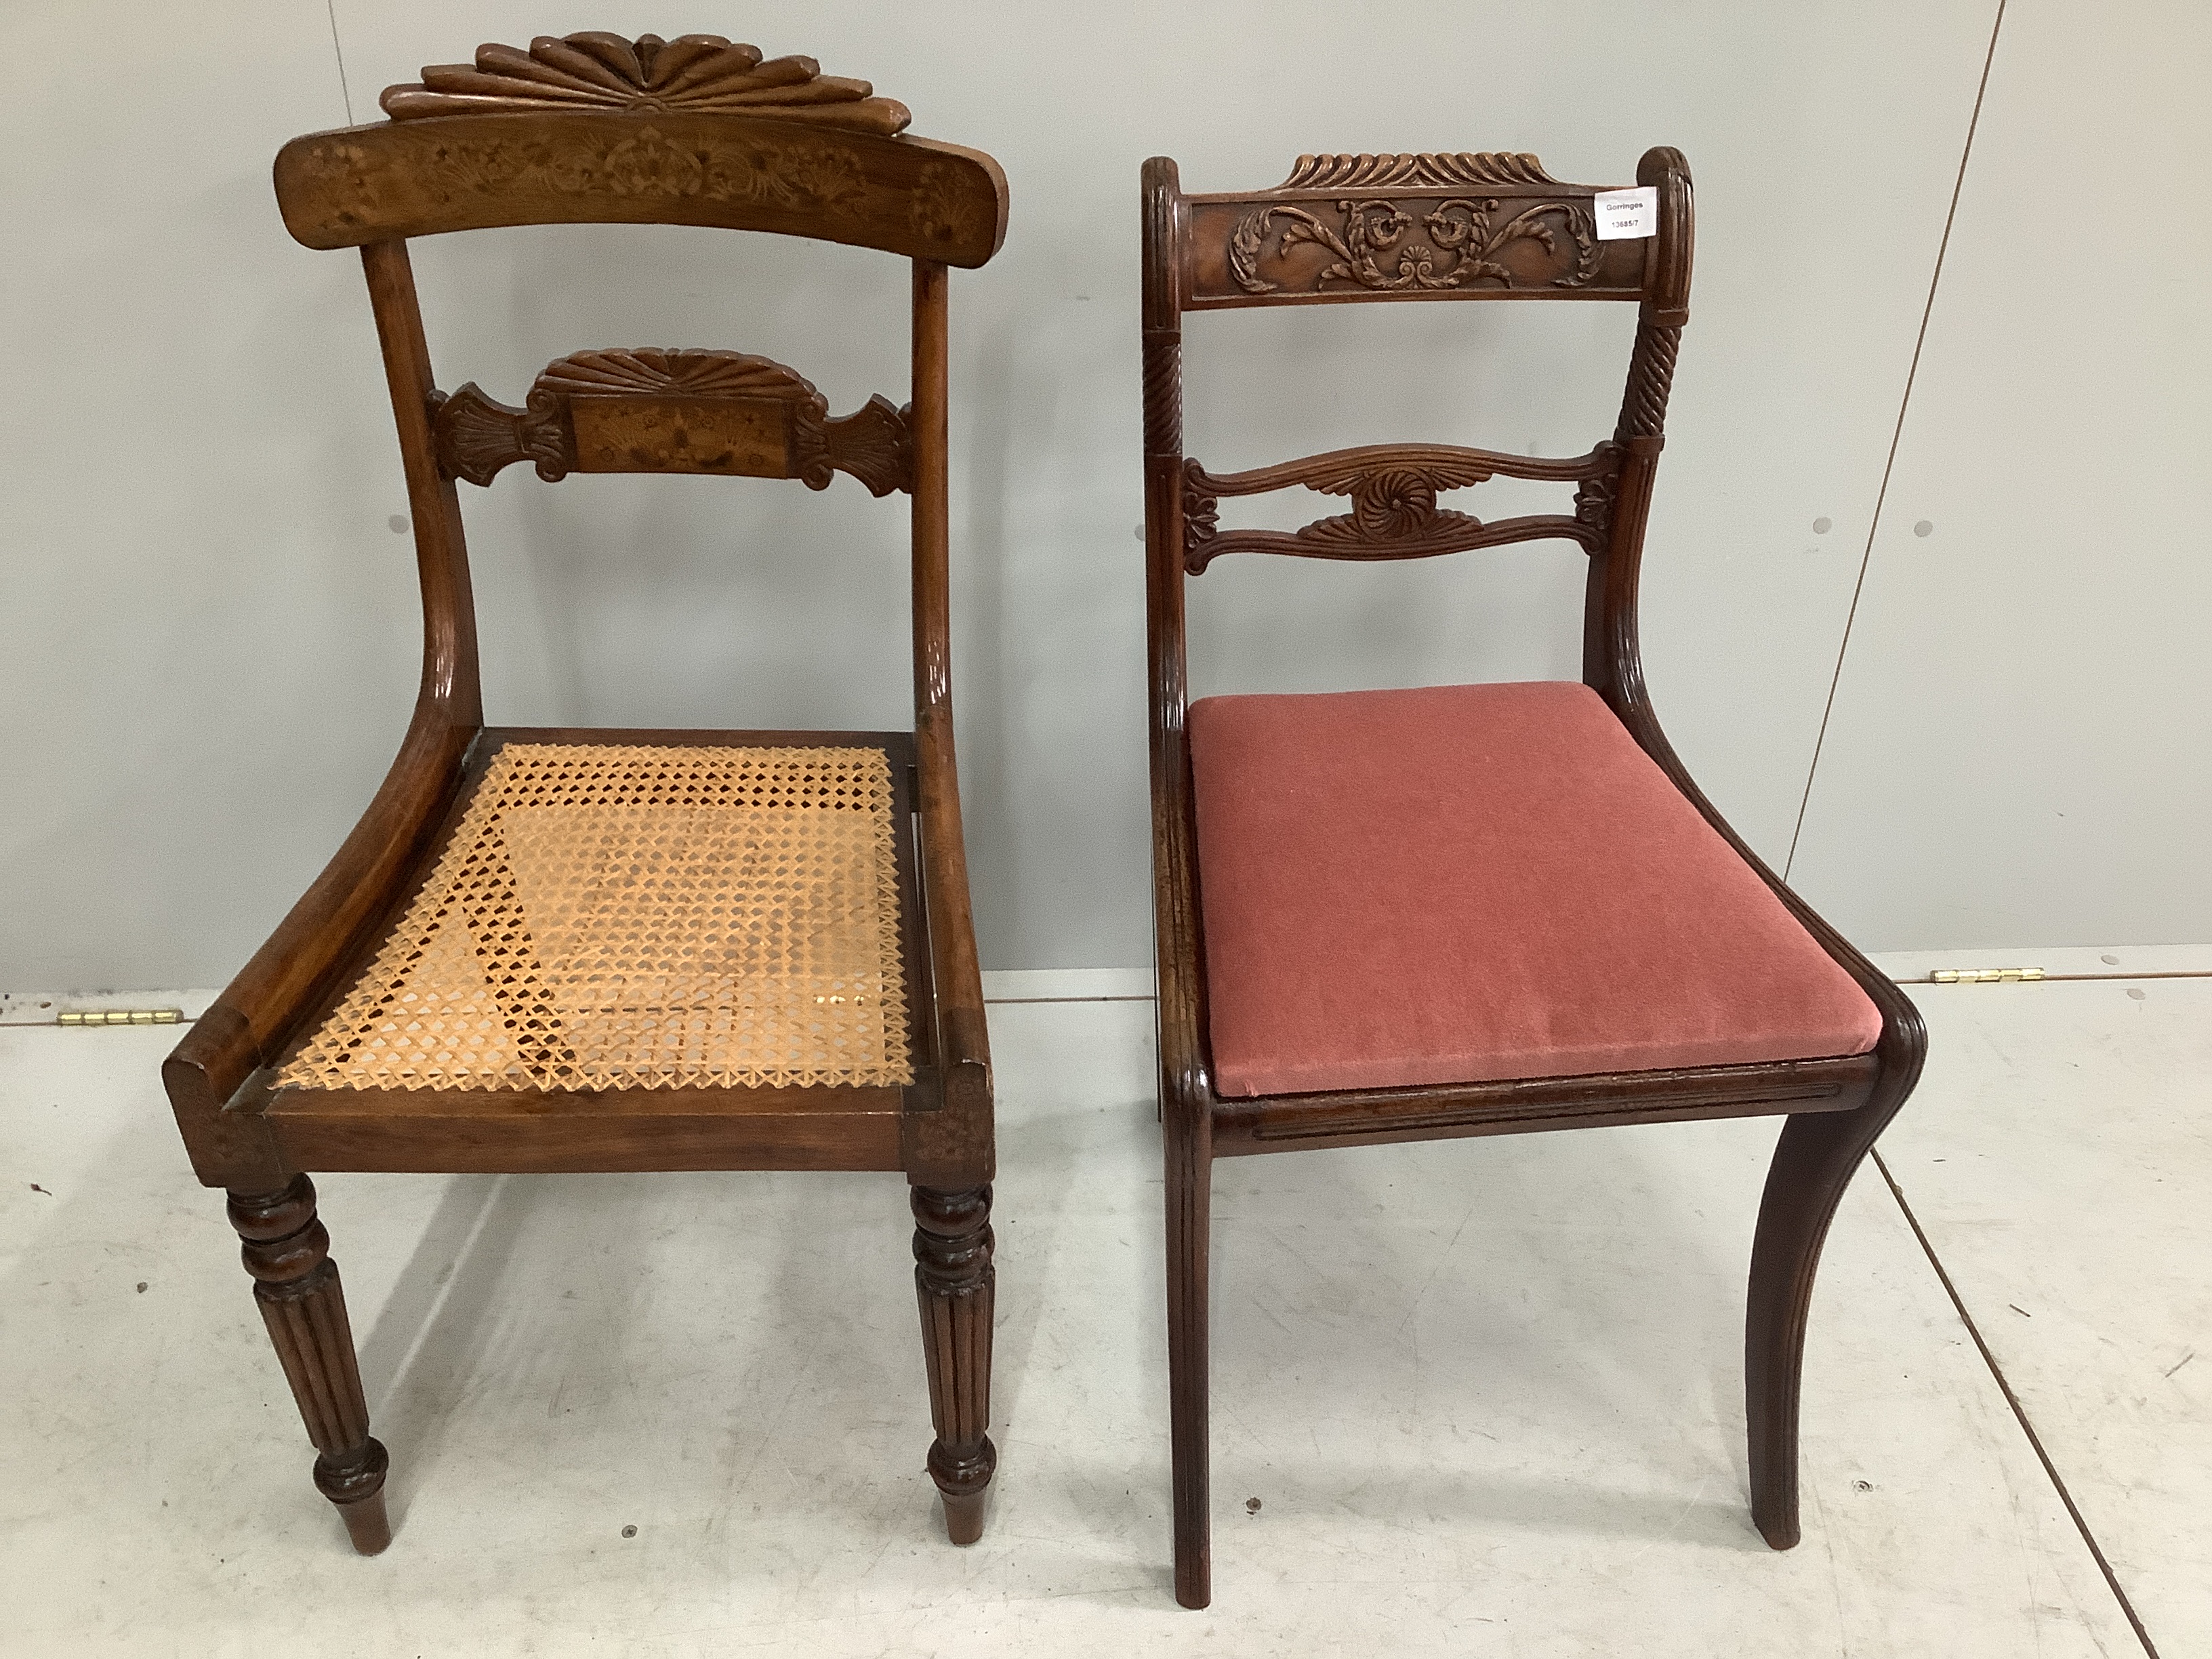 A Regency mahogany and marquetry dining chair and a Regency carved mahogany dining chair